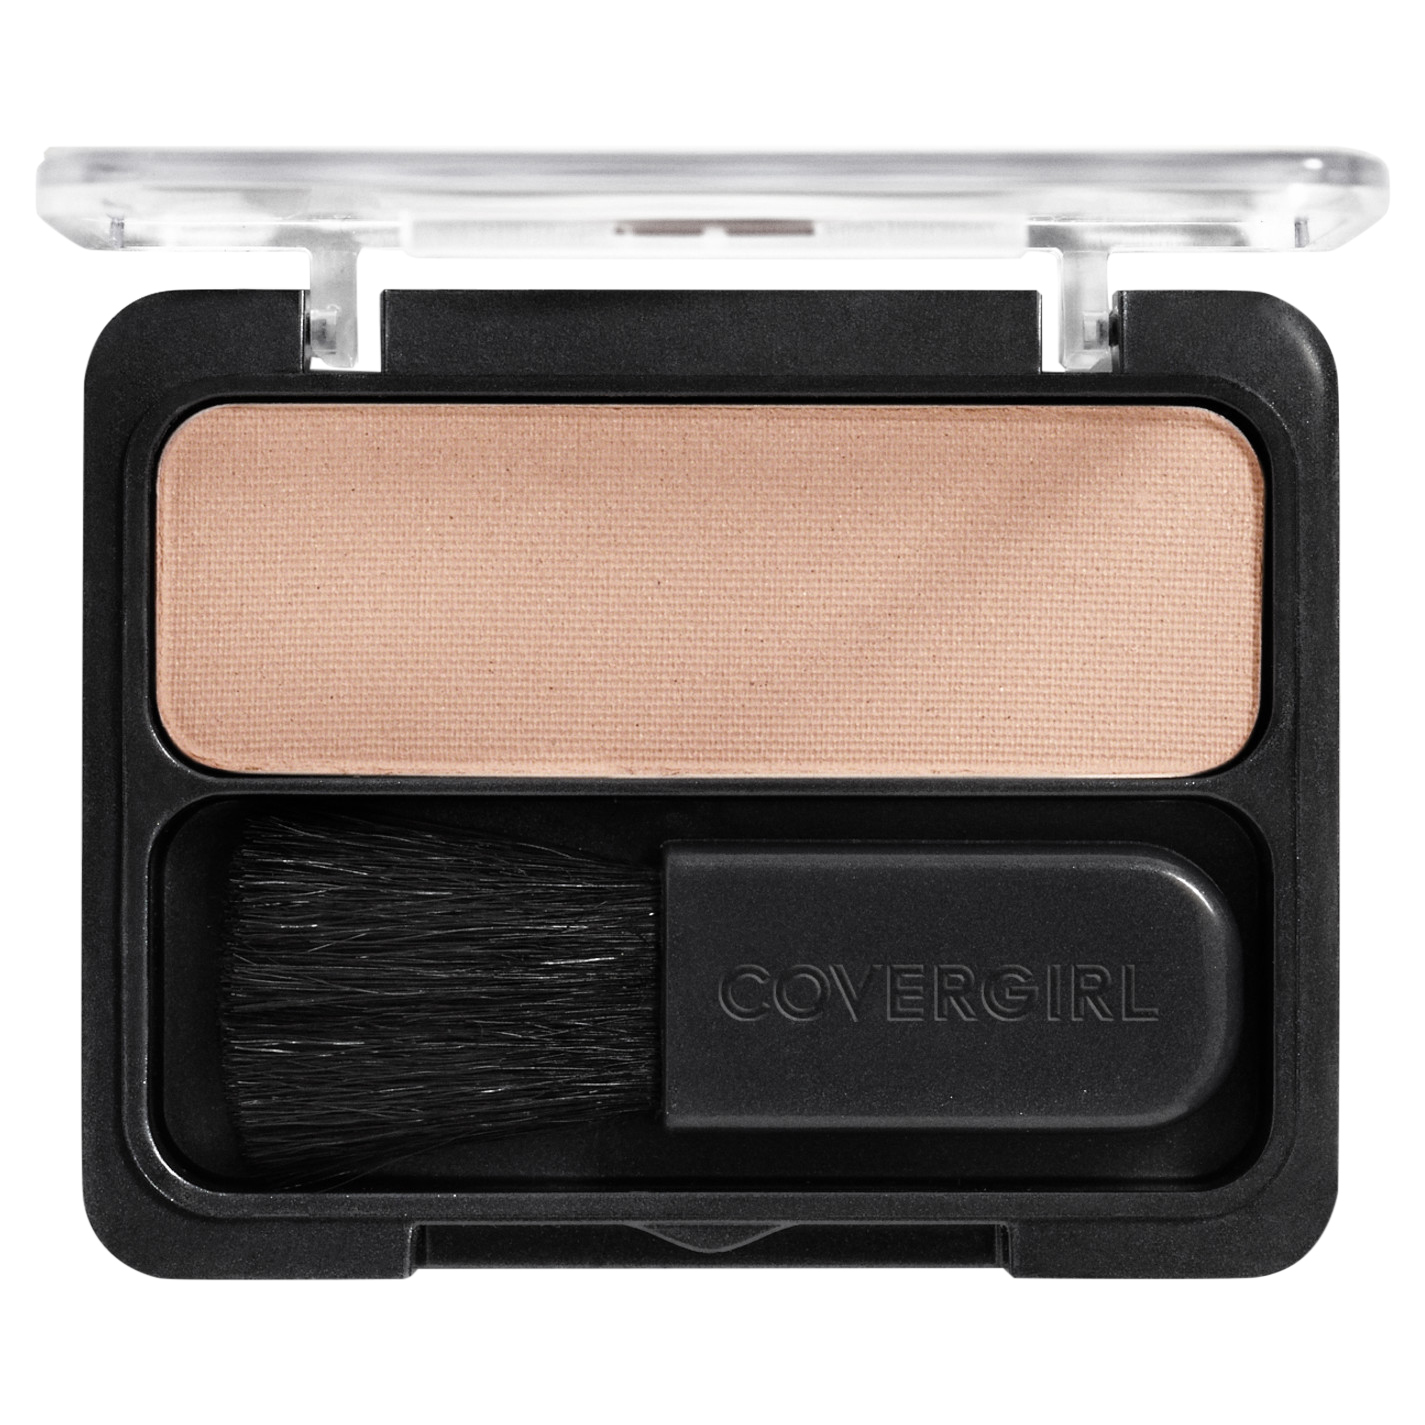 COVERGIRL Cheekers Blendable Powder Blush, 103 Natural Shimmer, 0.12 oz - image 1 of 9